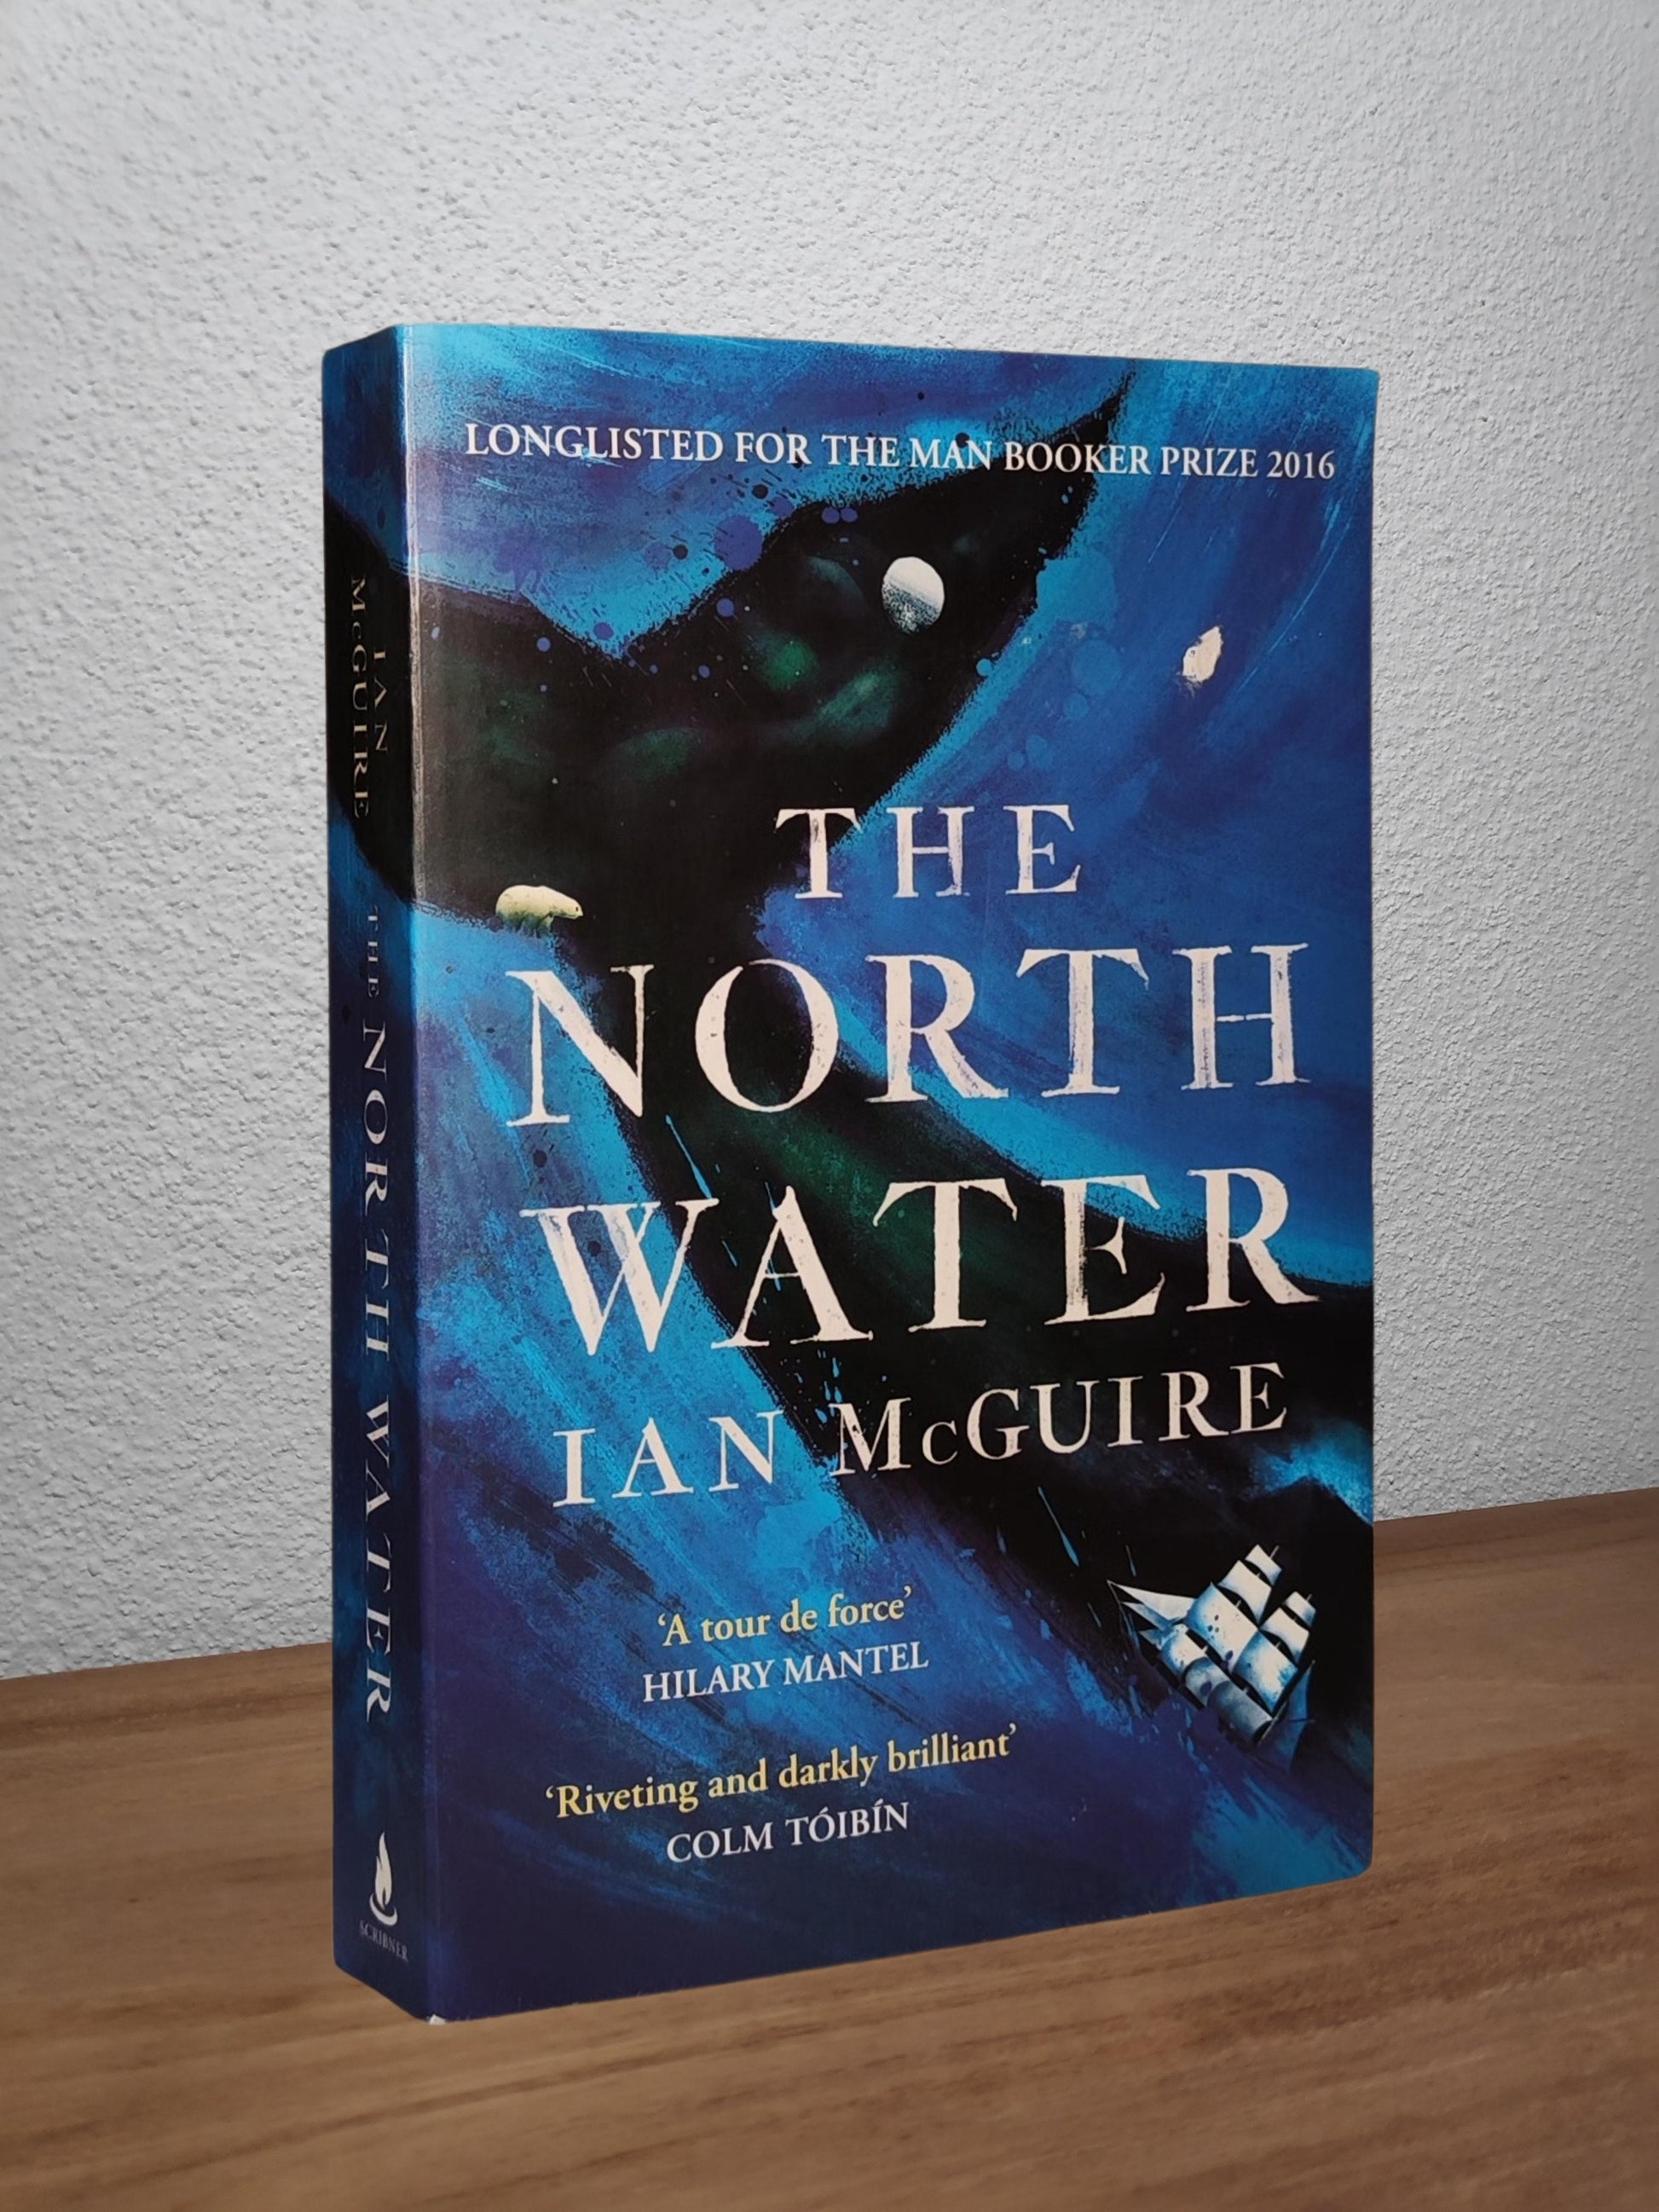 Ian McGuire - The North Water - Second-hand english book to deliver in Zurich & Switzerland